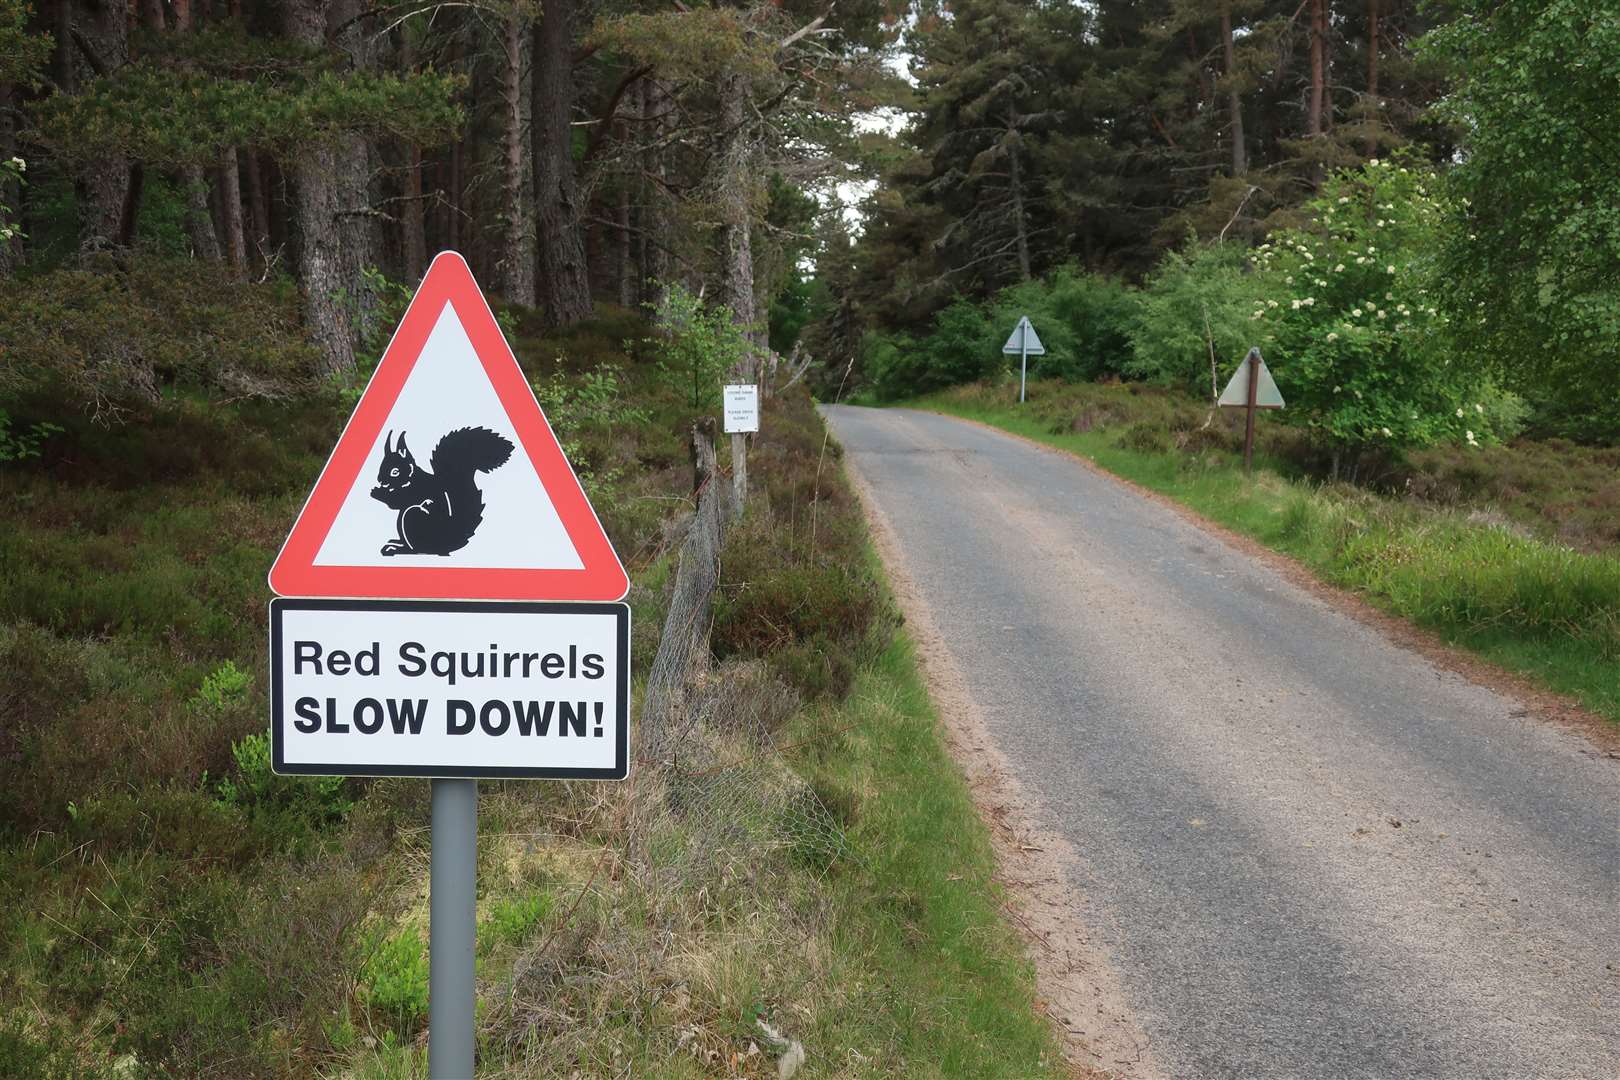 Red squirrels warning sign before the descent to Drynachan.